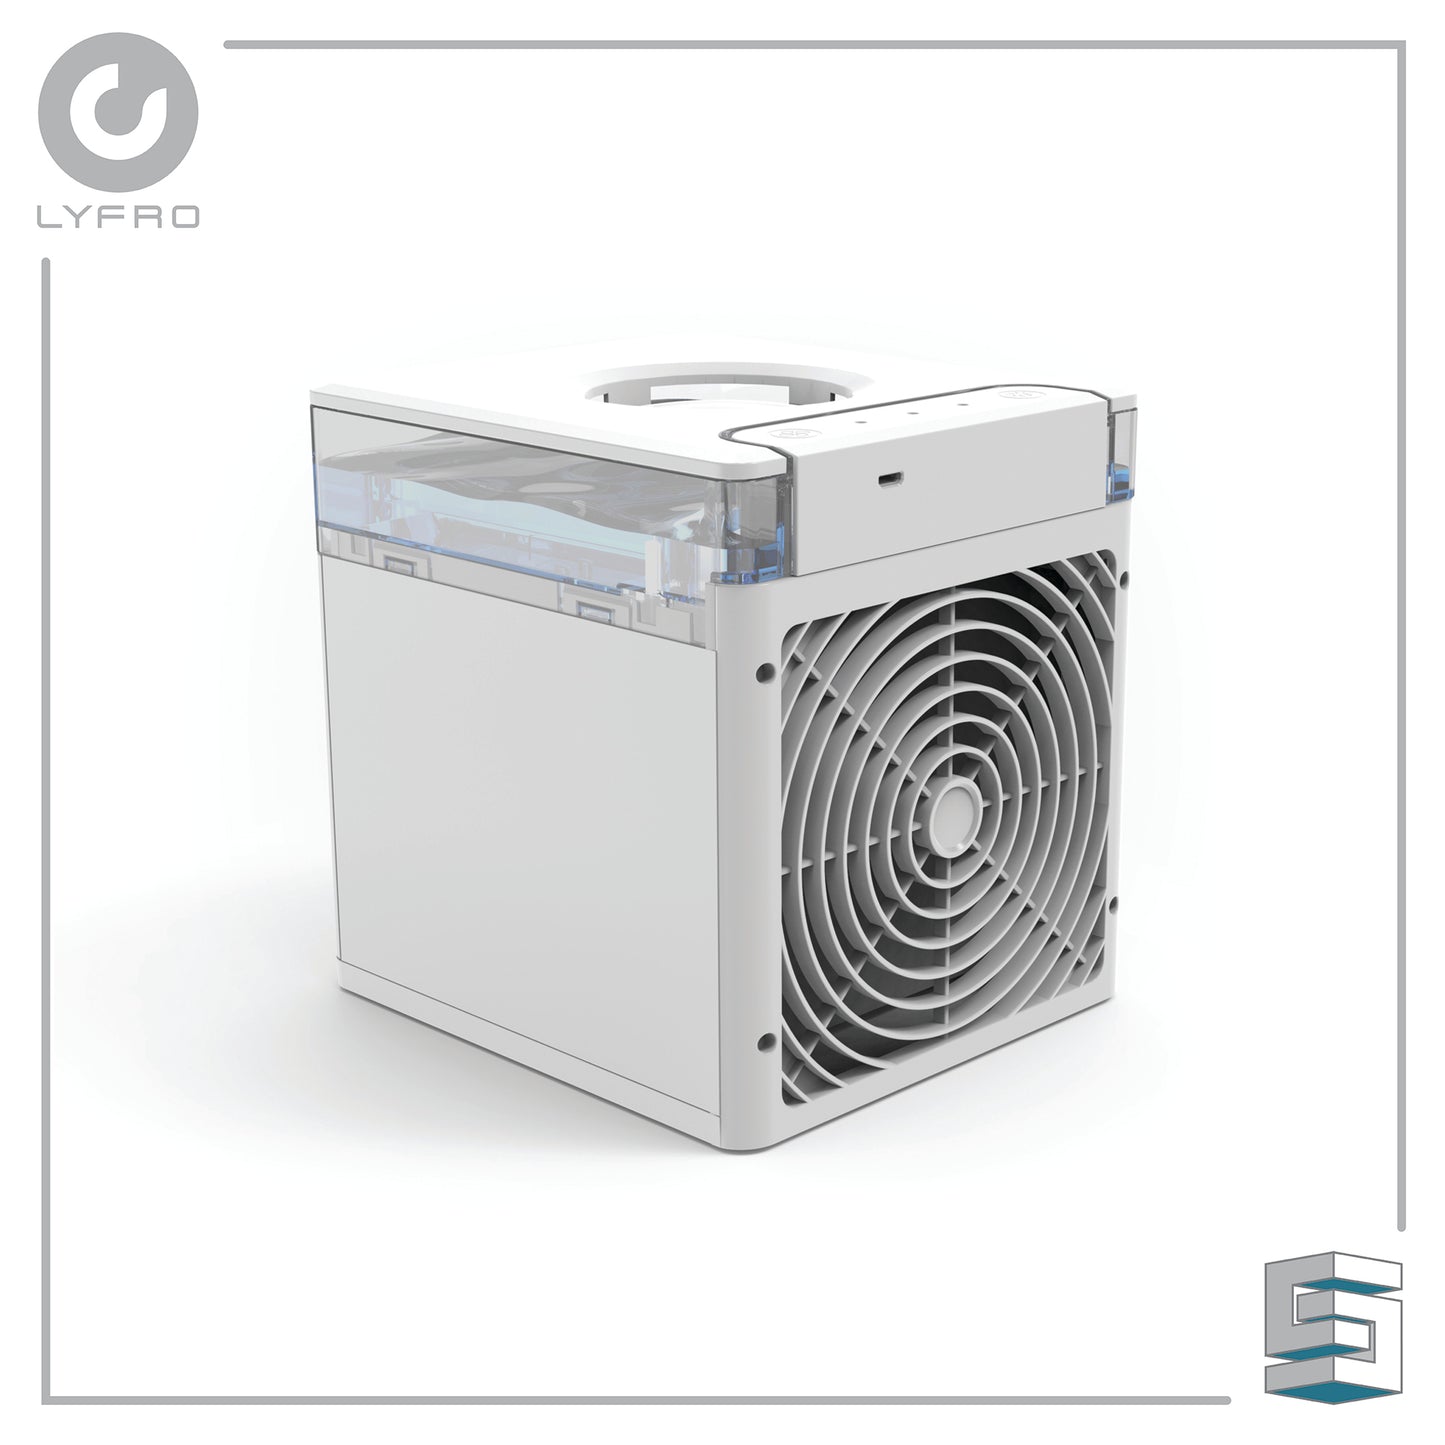 Portable UVC Purifying Air Cooler - LYFRO Blast Global Synergy Concepts